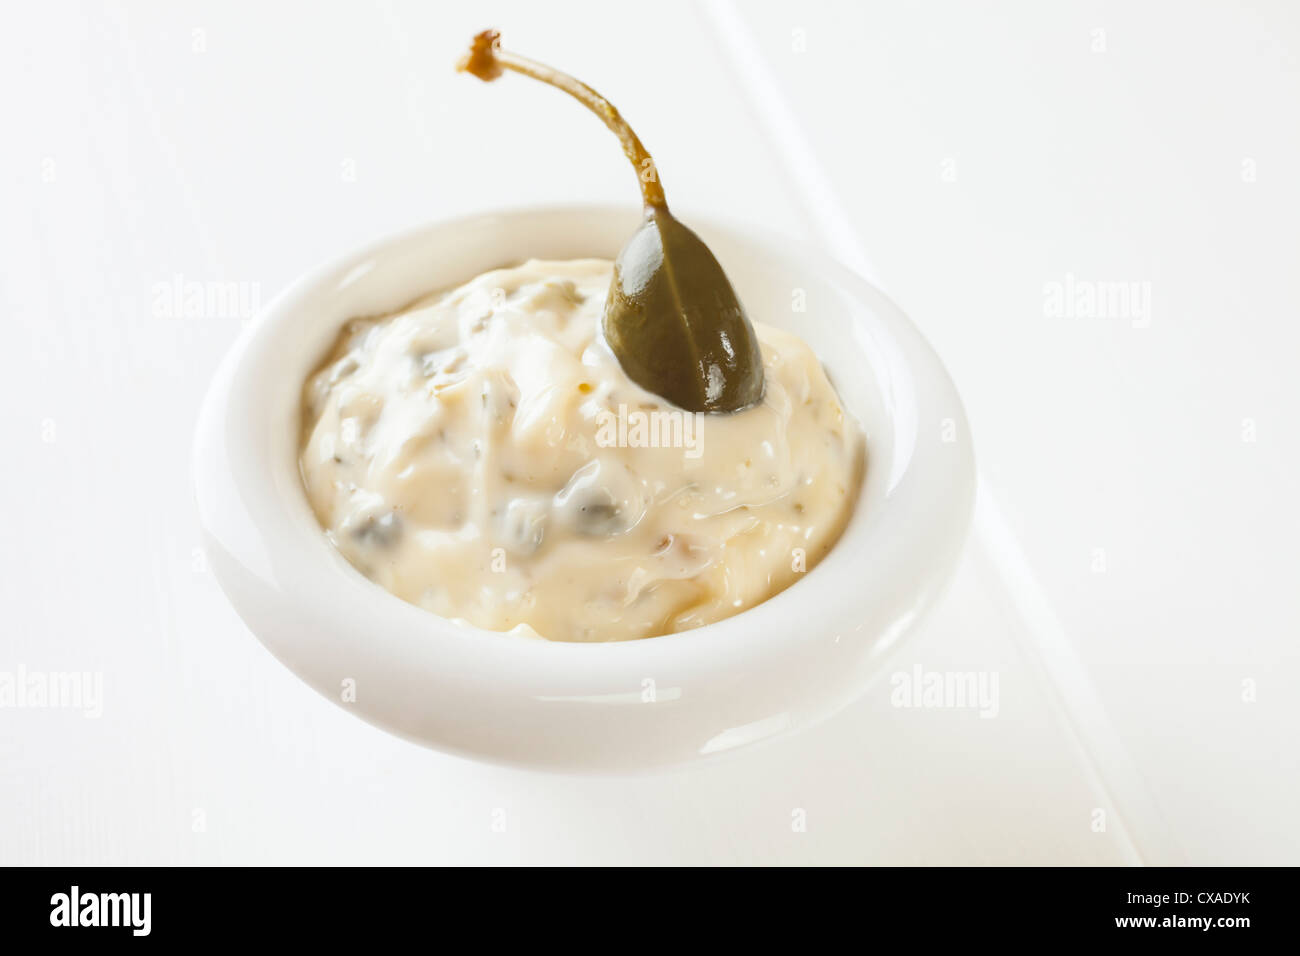 A small bowl of homemade tartare sauce with a caperberry. Stock Photo